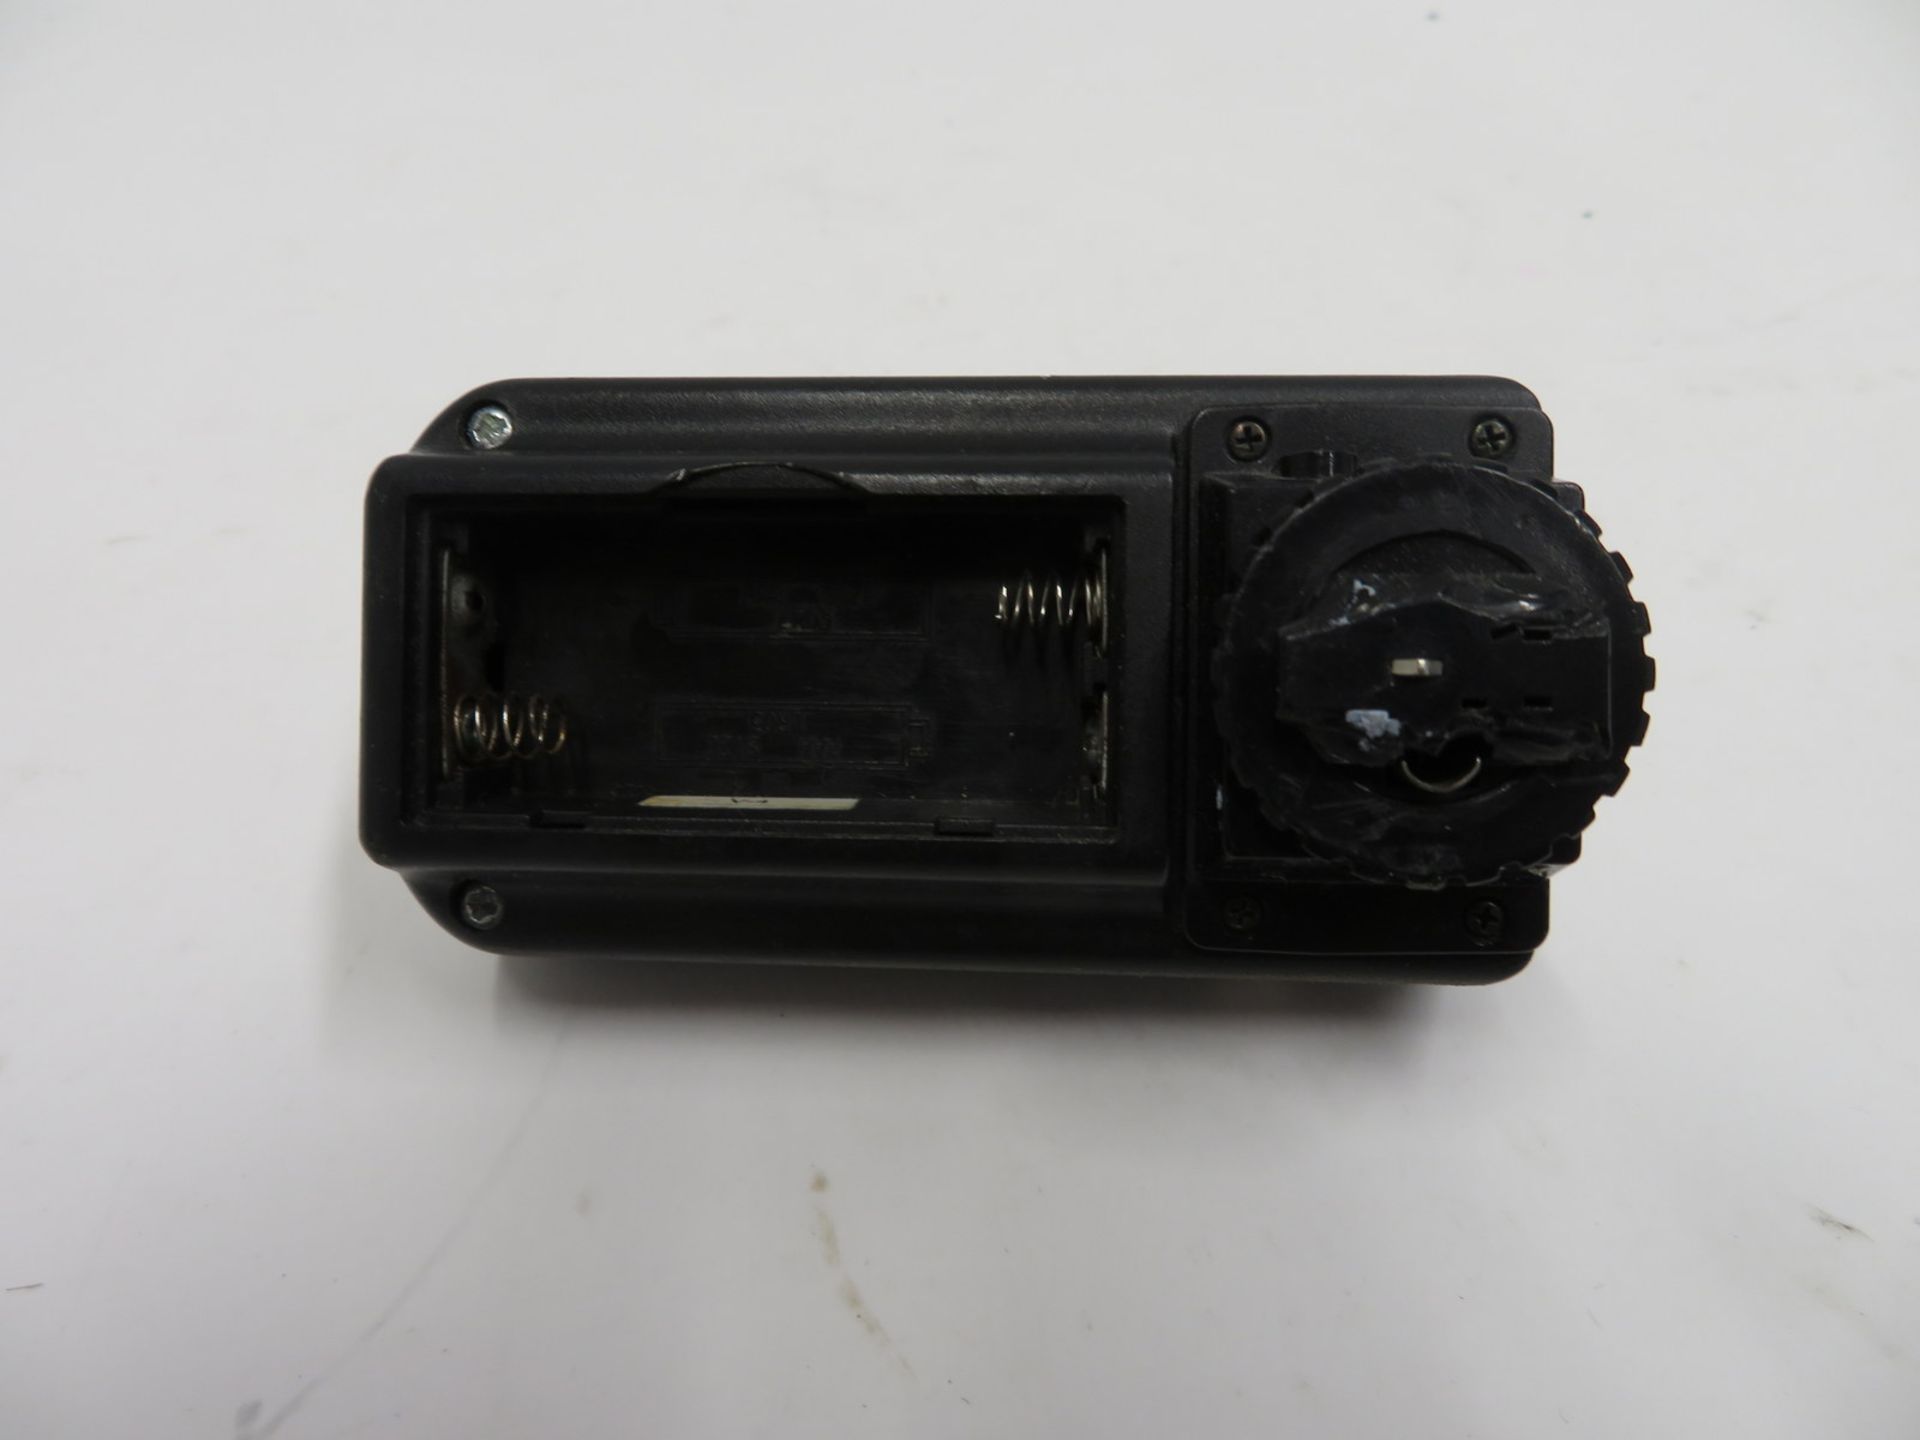 Bowens Pulsar radio trigger system, no battery cover - Image 3 of 3